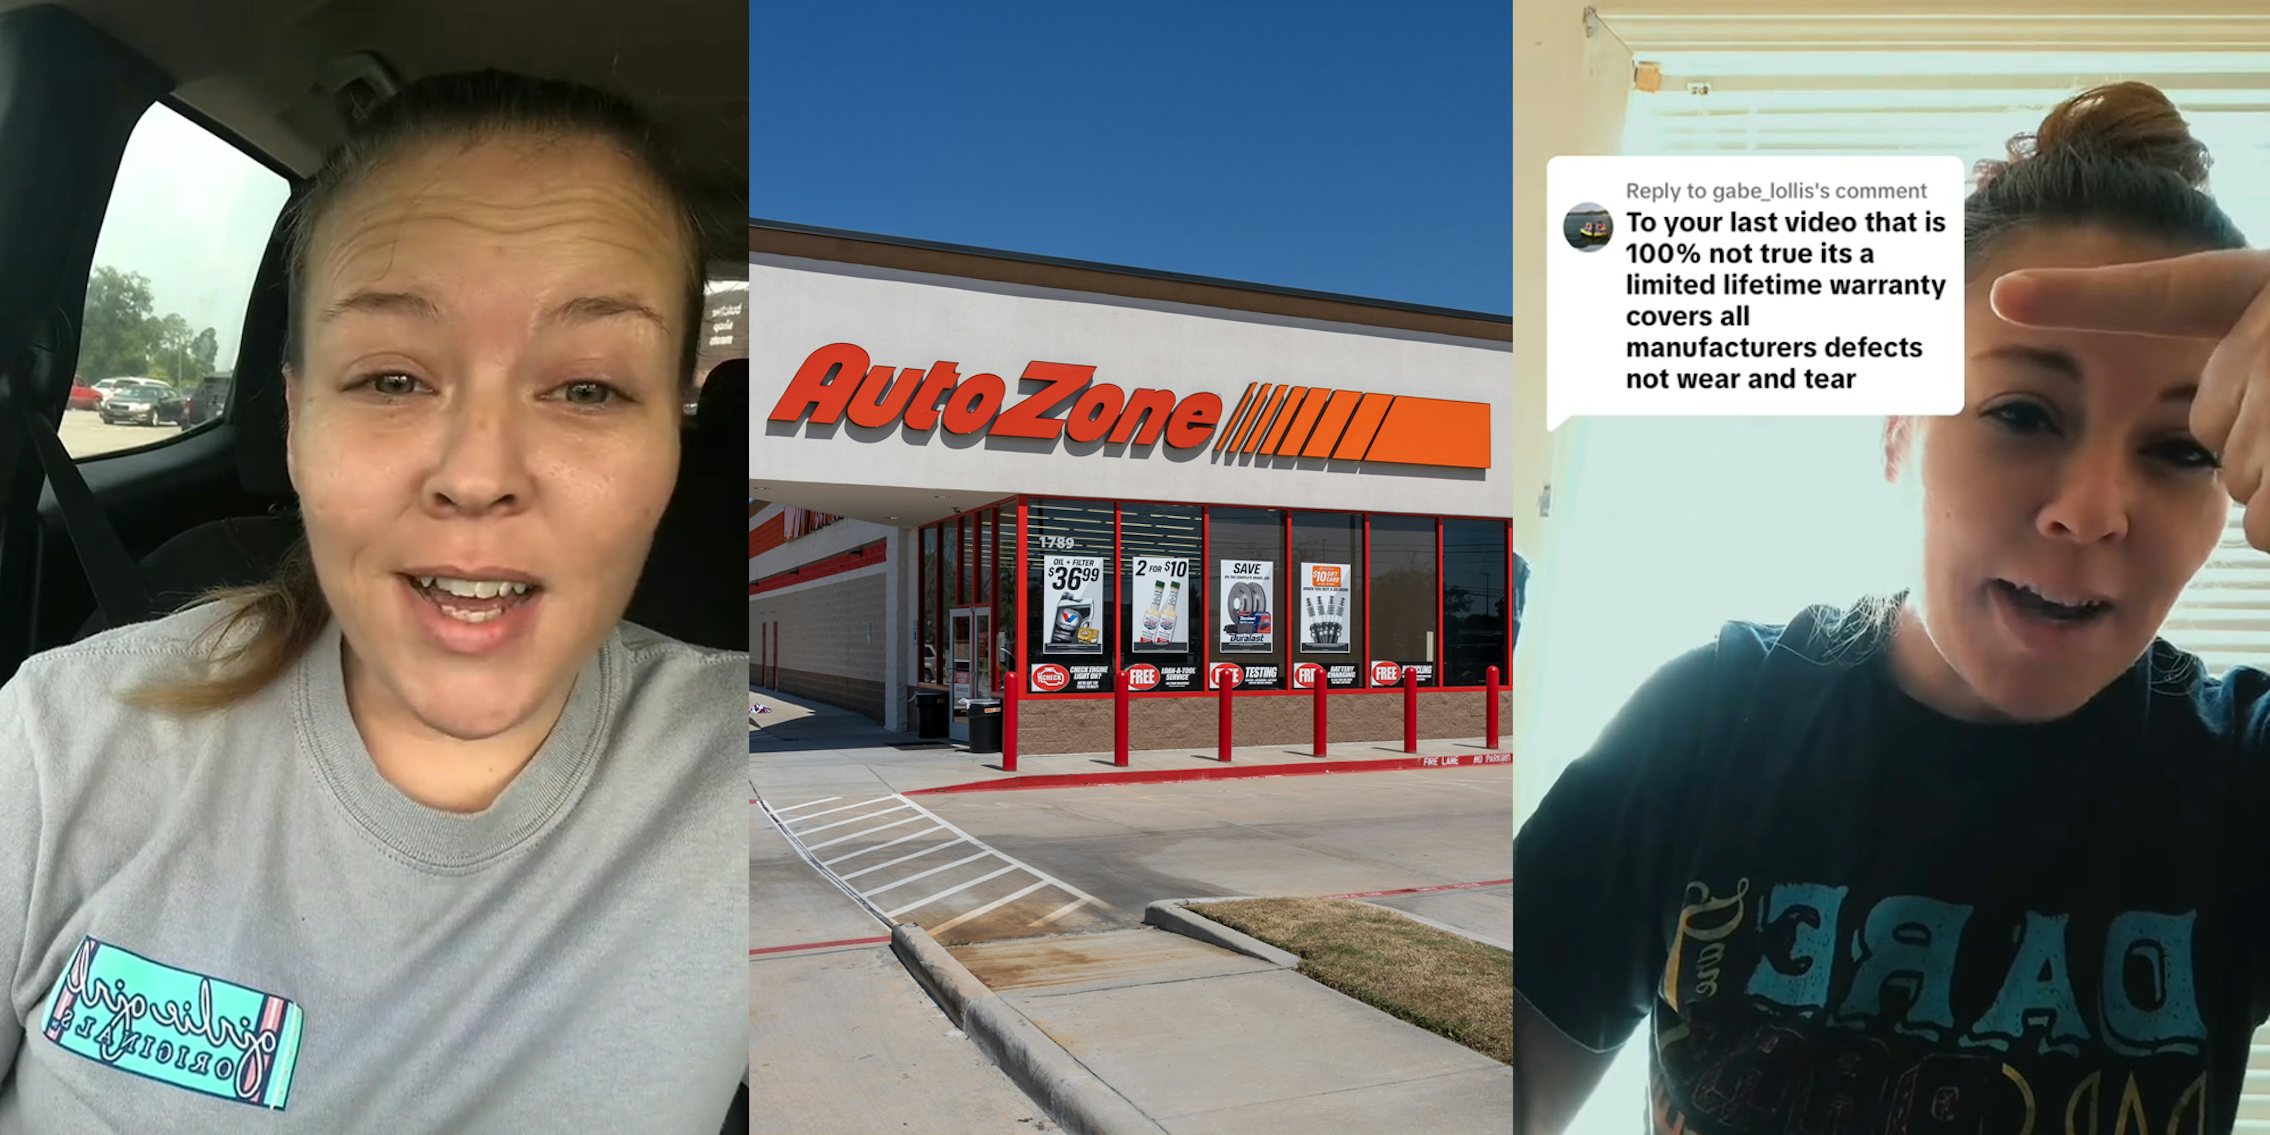 former AutoZone worker speaking in car (l) AutoZone building with sign (c) former AutoZone worker speaking pointing to caption 'To your last video that is %100 not true its a limited lifetime warranty covers all manufactures defects not wear and tear' (r)